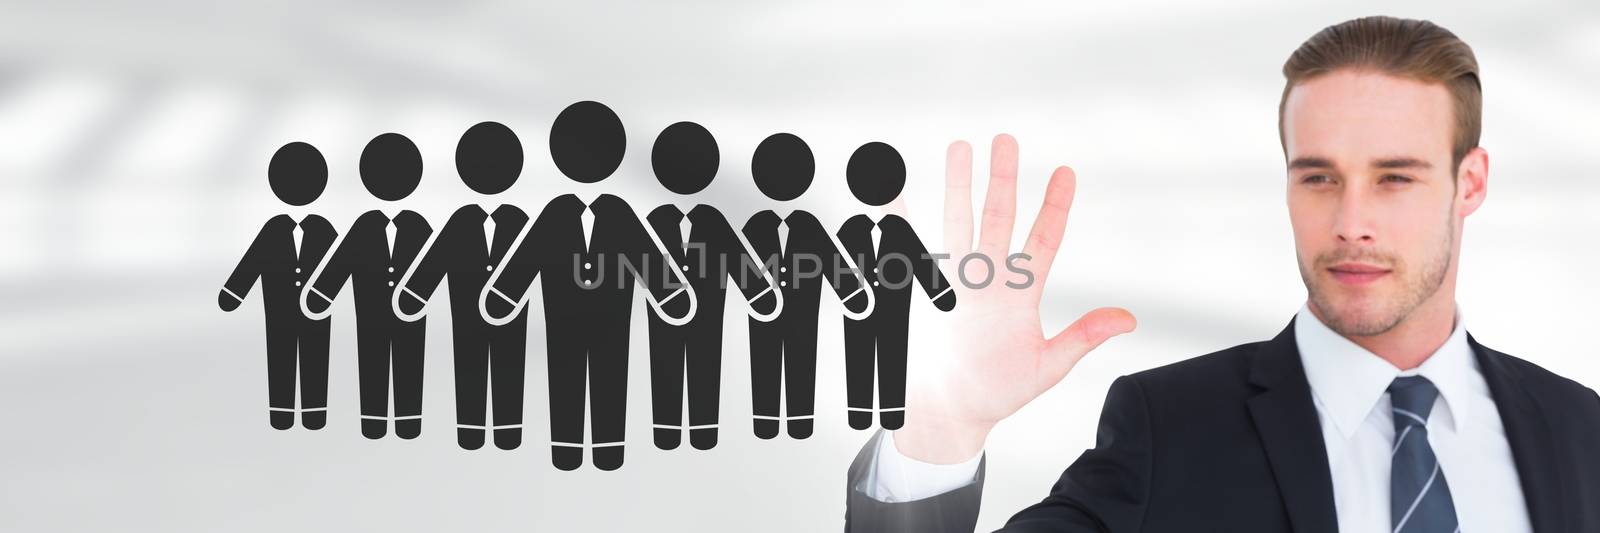 Businessman with open hand and business people group icon by Wavebreakmedia